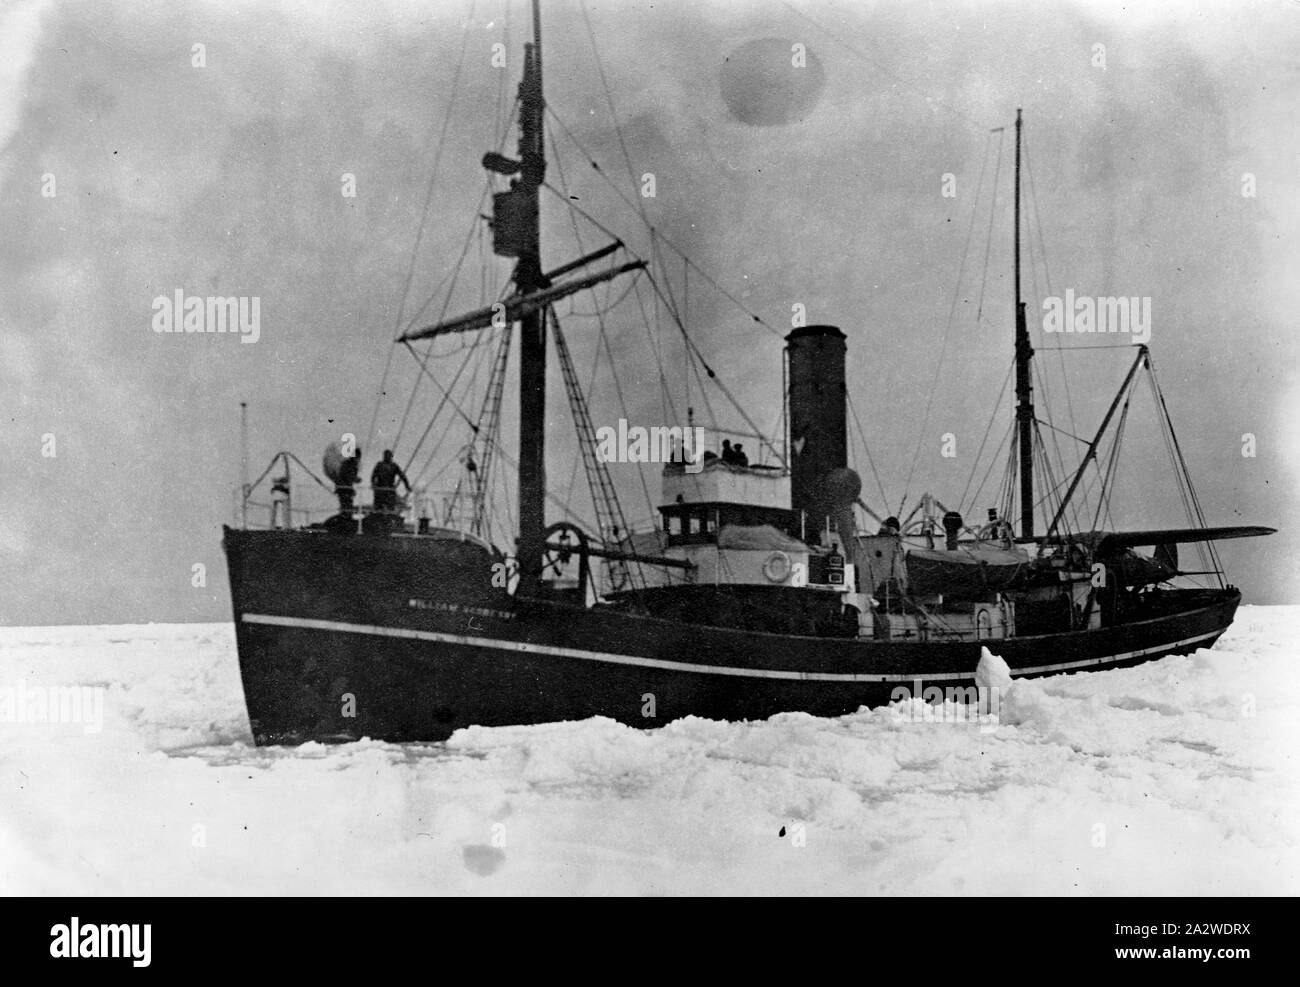 Photograph - by George Rayner, Beascochea Bay, Antarctica, 1927-1939, Photograph taken during a series of scientific expeditions undertaken in the waters off Antarctica, during the late 1920s and 1930s. Probably taken by George W. Rayner, who was employed as a biologist on the expeditions. The 'William Scoresby' was a purpose-designed research vessel built for the Discovery Committee by the East Yorkshire shipyard of Cook, Welton & Gemmell, at Beverley. She was Stock Photo